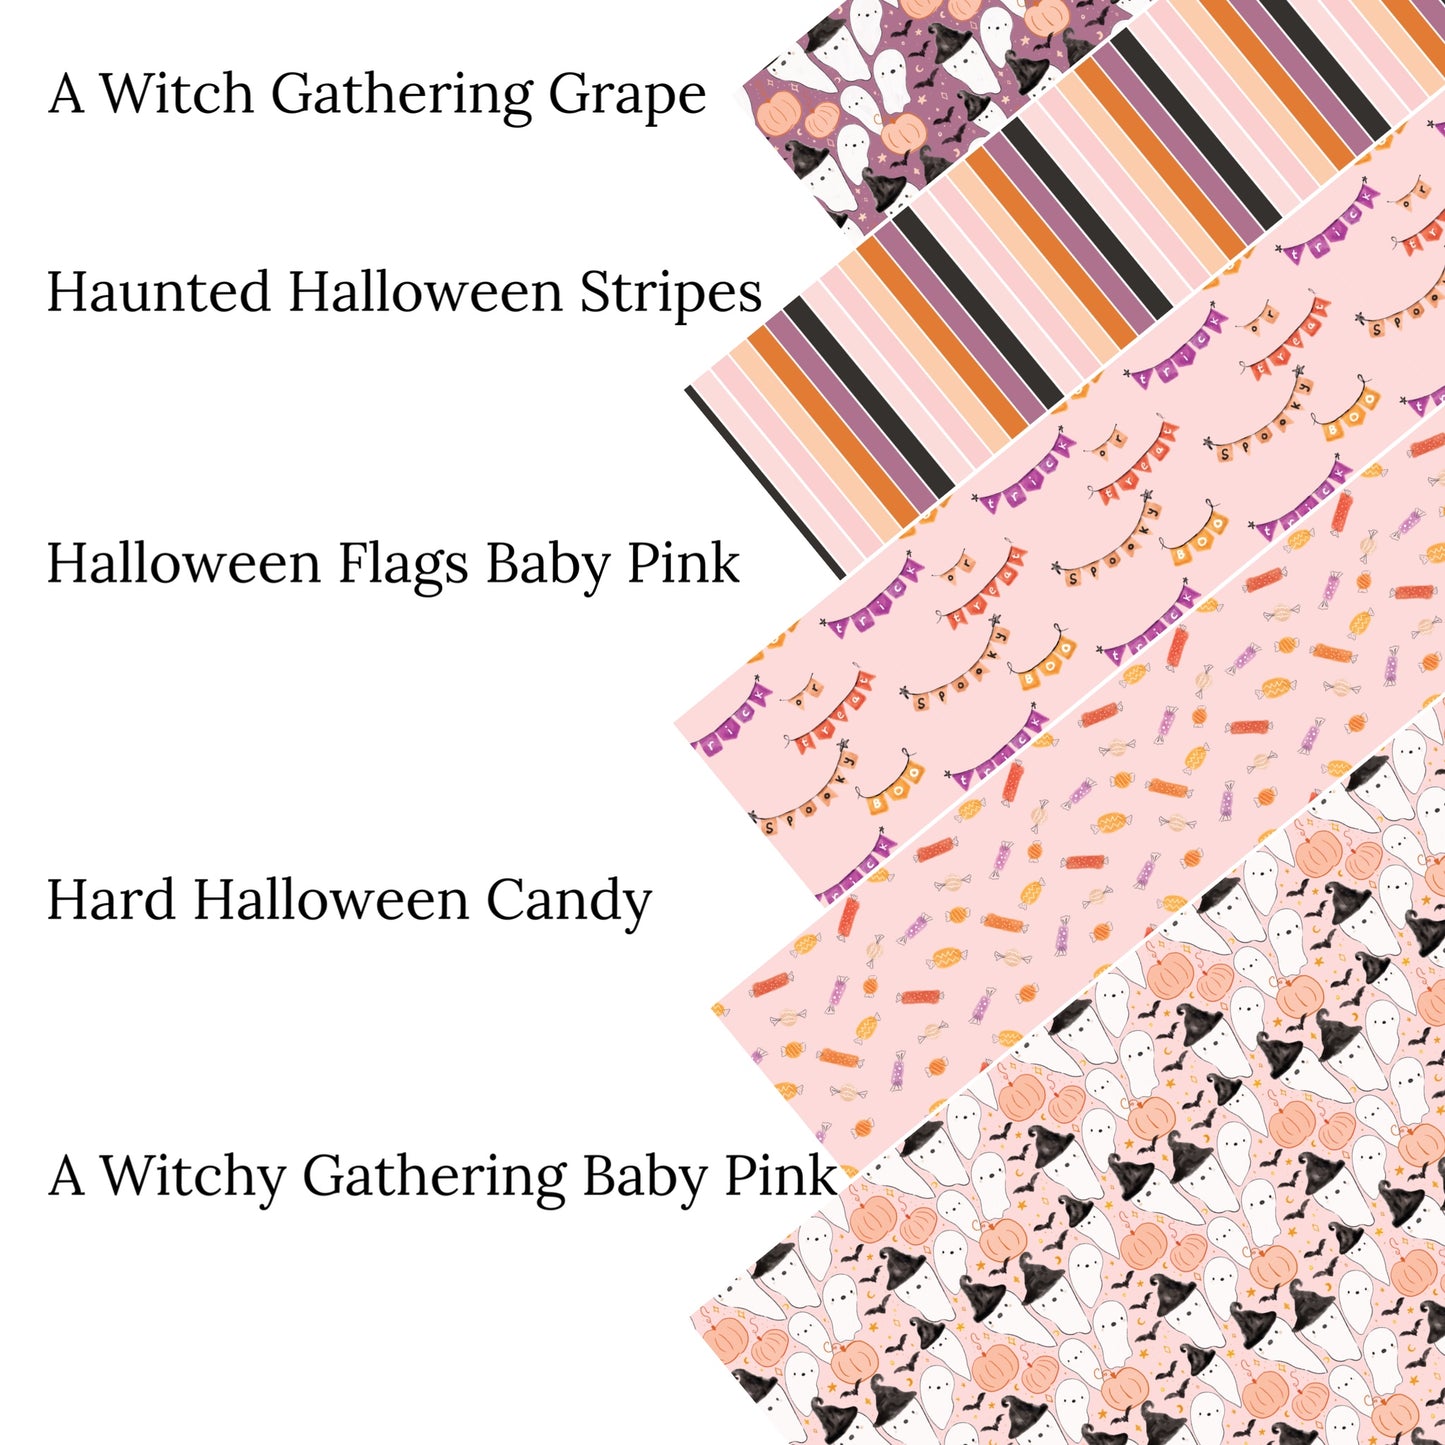 Haunted Halloween Stripes Faux Leather Sheets